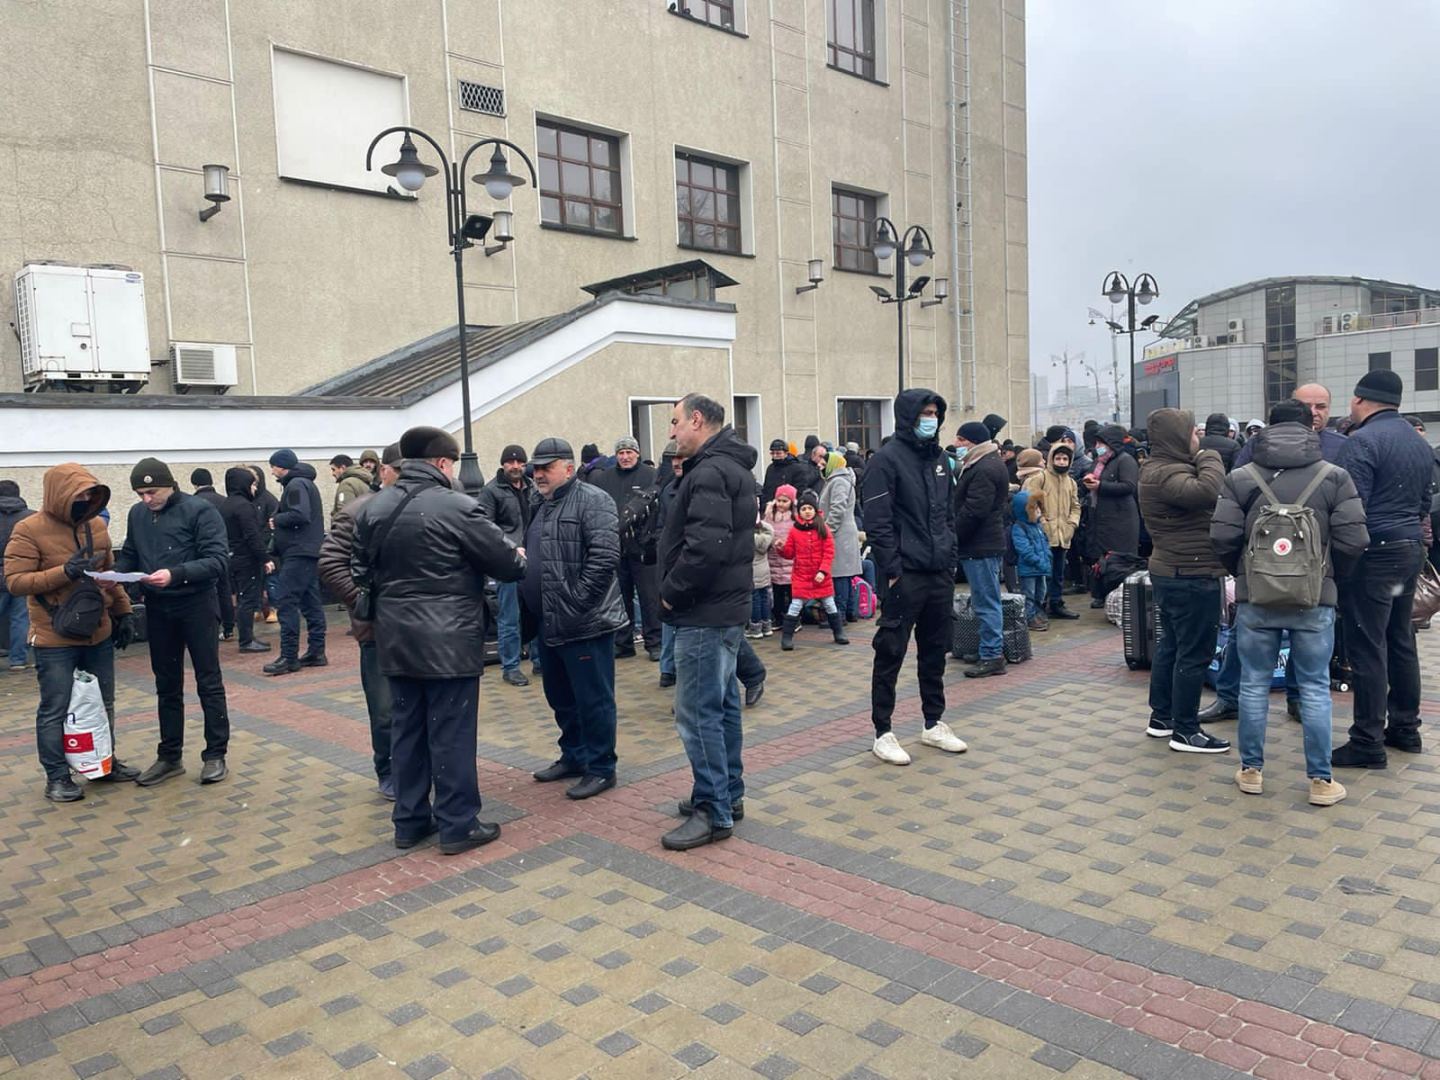 State Committee unveils number of Azerbaijani citizens leaving Kyiv and heading to border with Moldova (PHOTO)